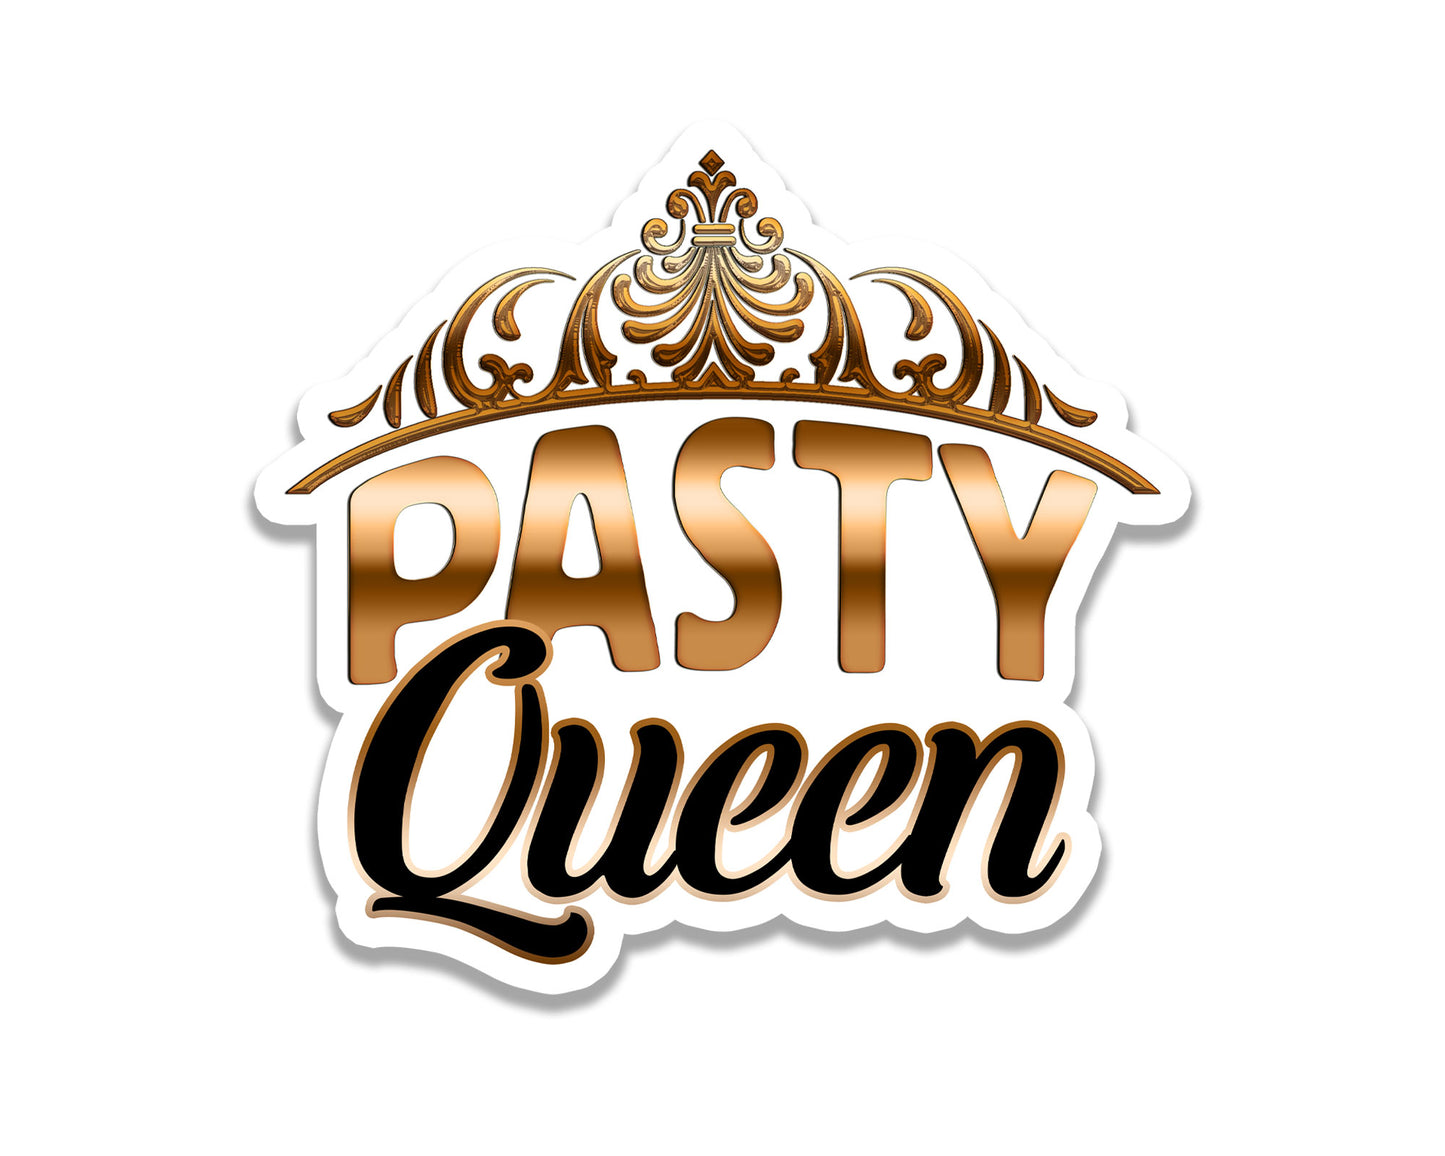 Pasty Magnet, Finnish Fridge Magnets, Pasty Queen Gift for Finns and Yoopers